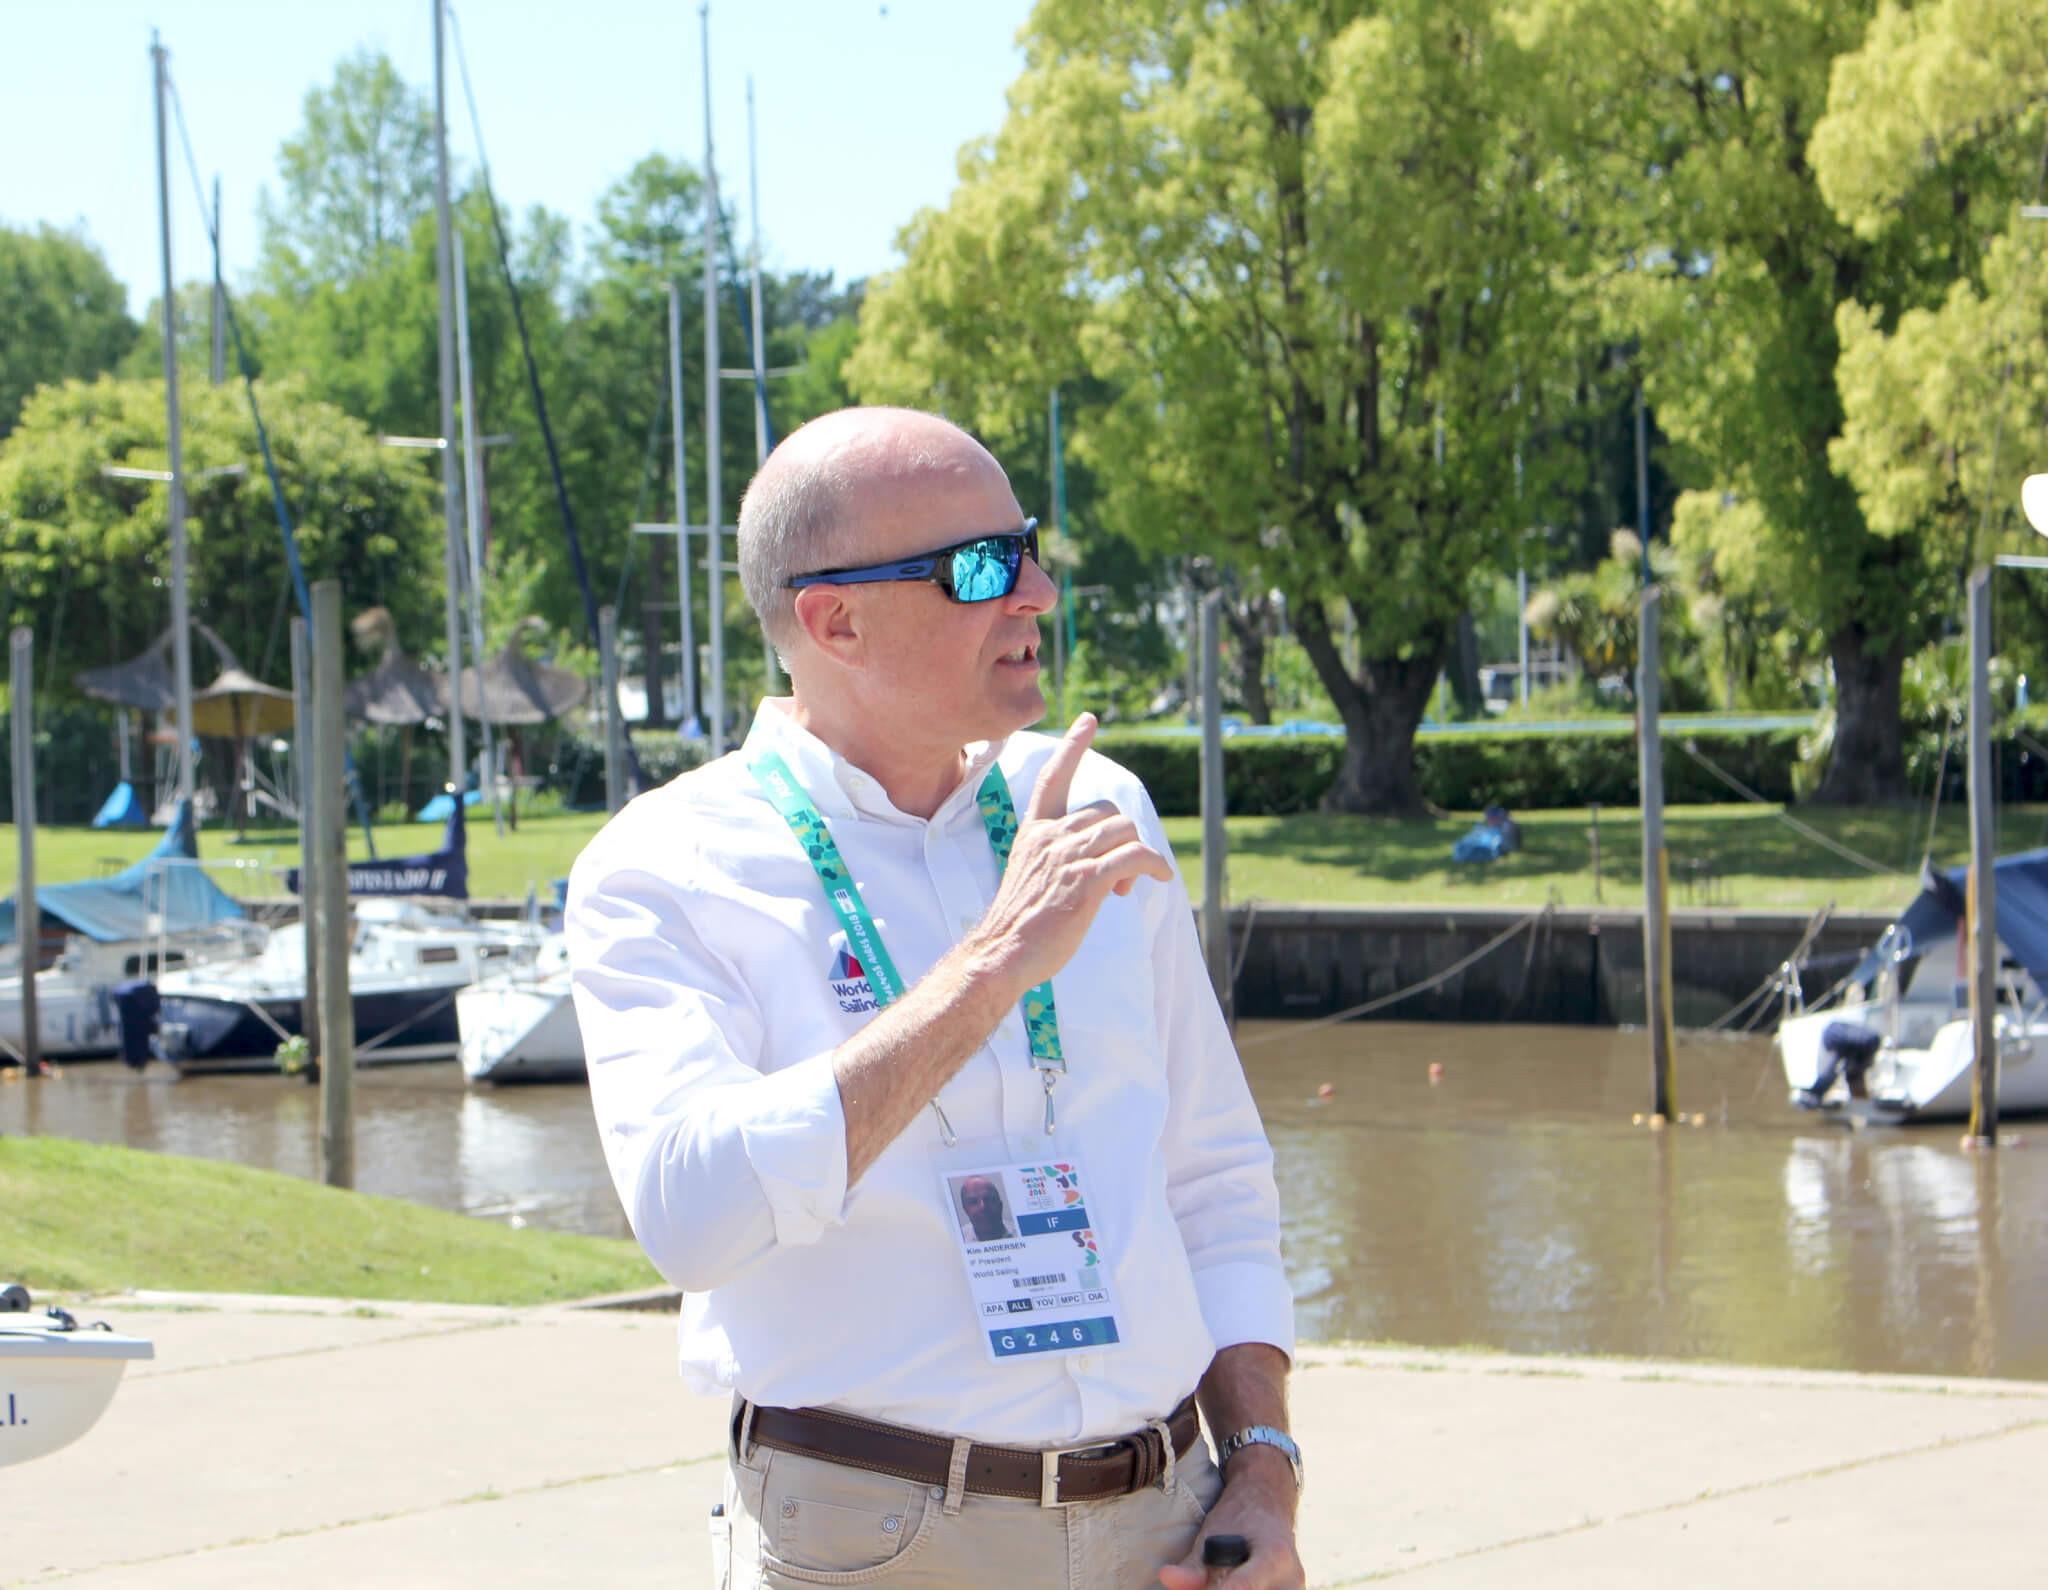 World Sailing President Kim Andersen claimed they have already started discussions with the International Paralympic Committee about restoring the sport to the Games in time for Los Angeles 2028 ©World Sailing